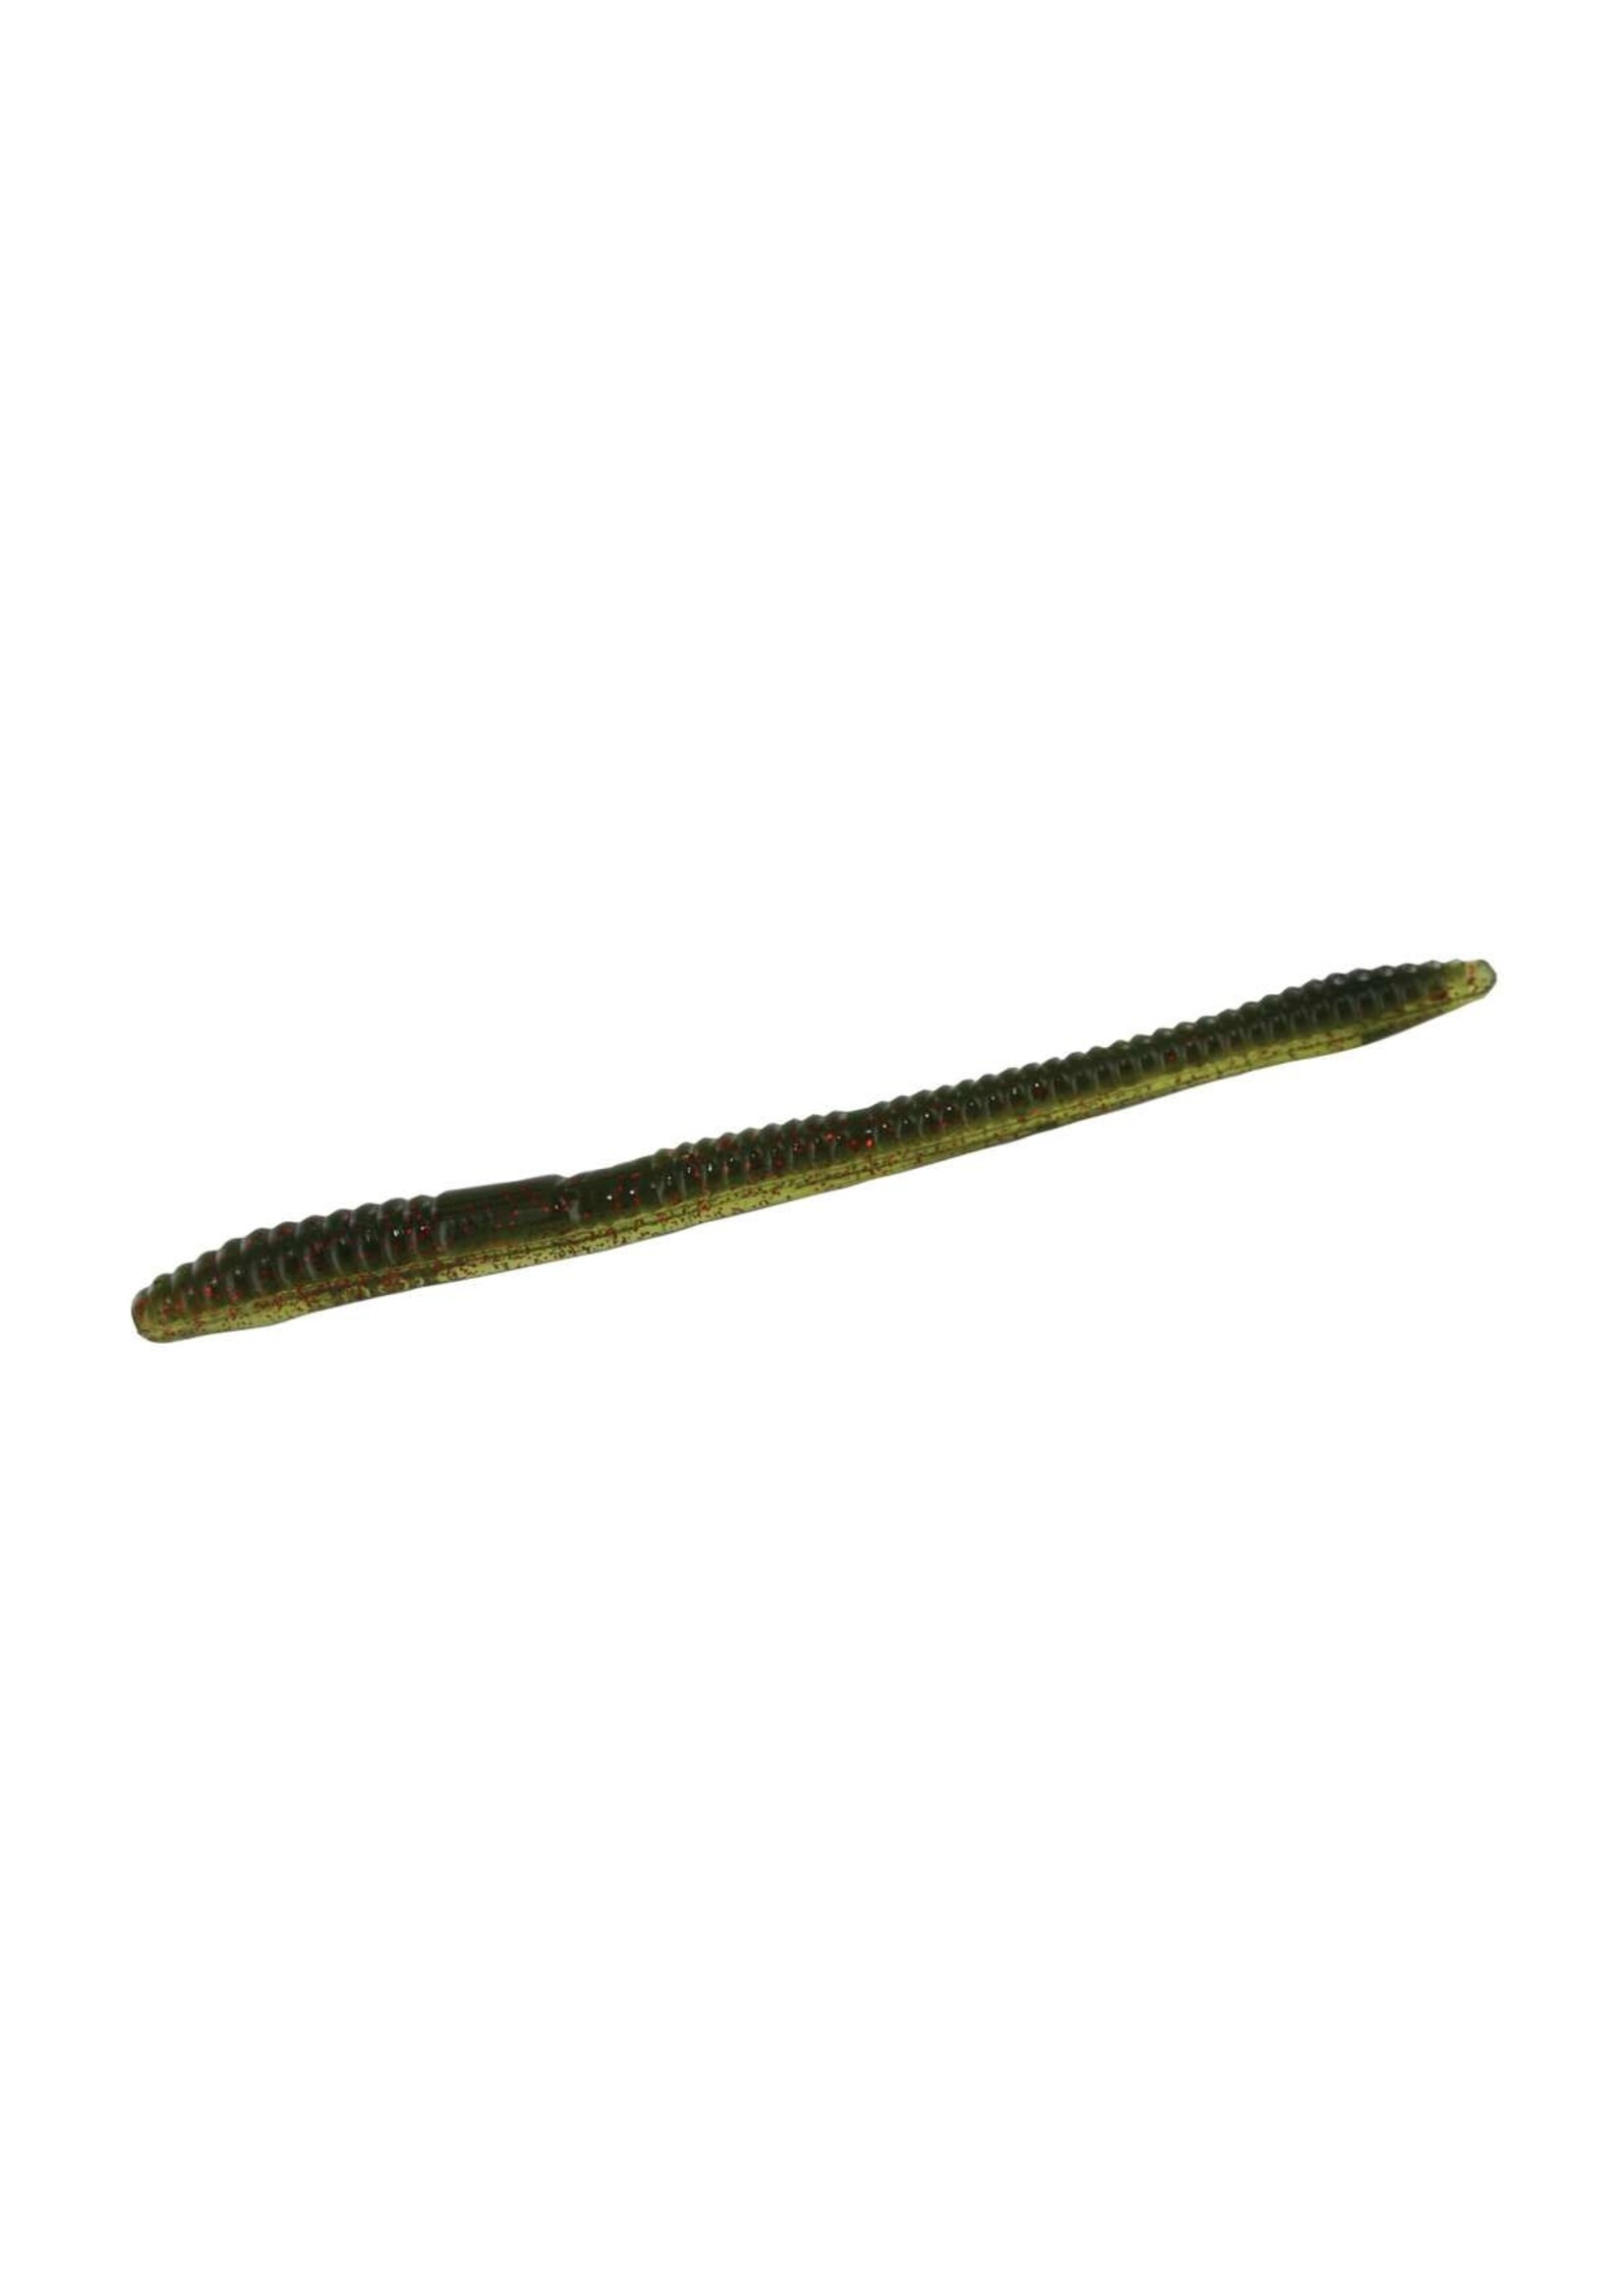 Zoom Zoom Finesse Worm